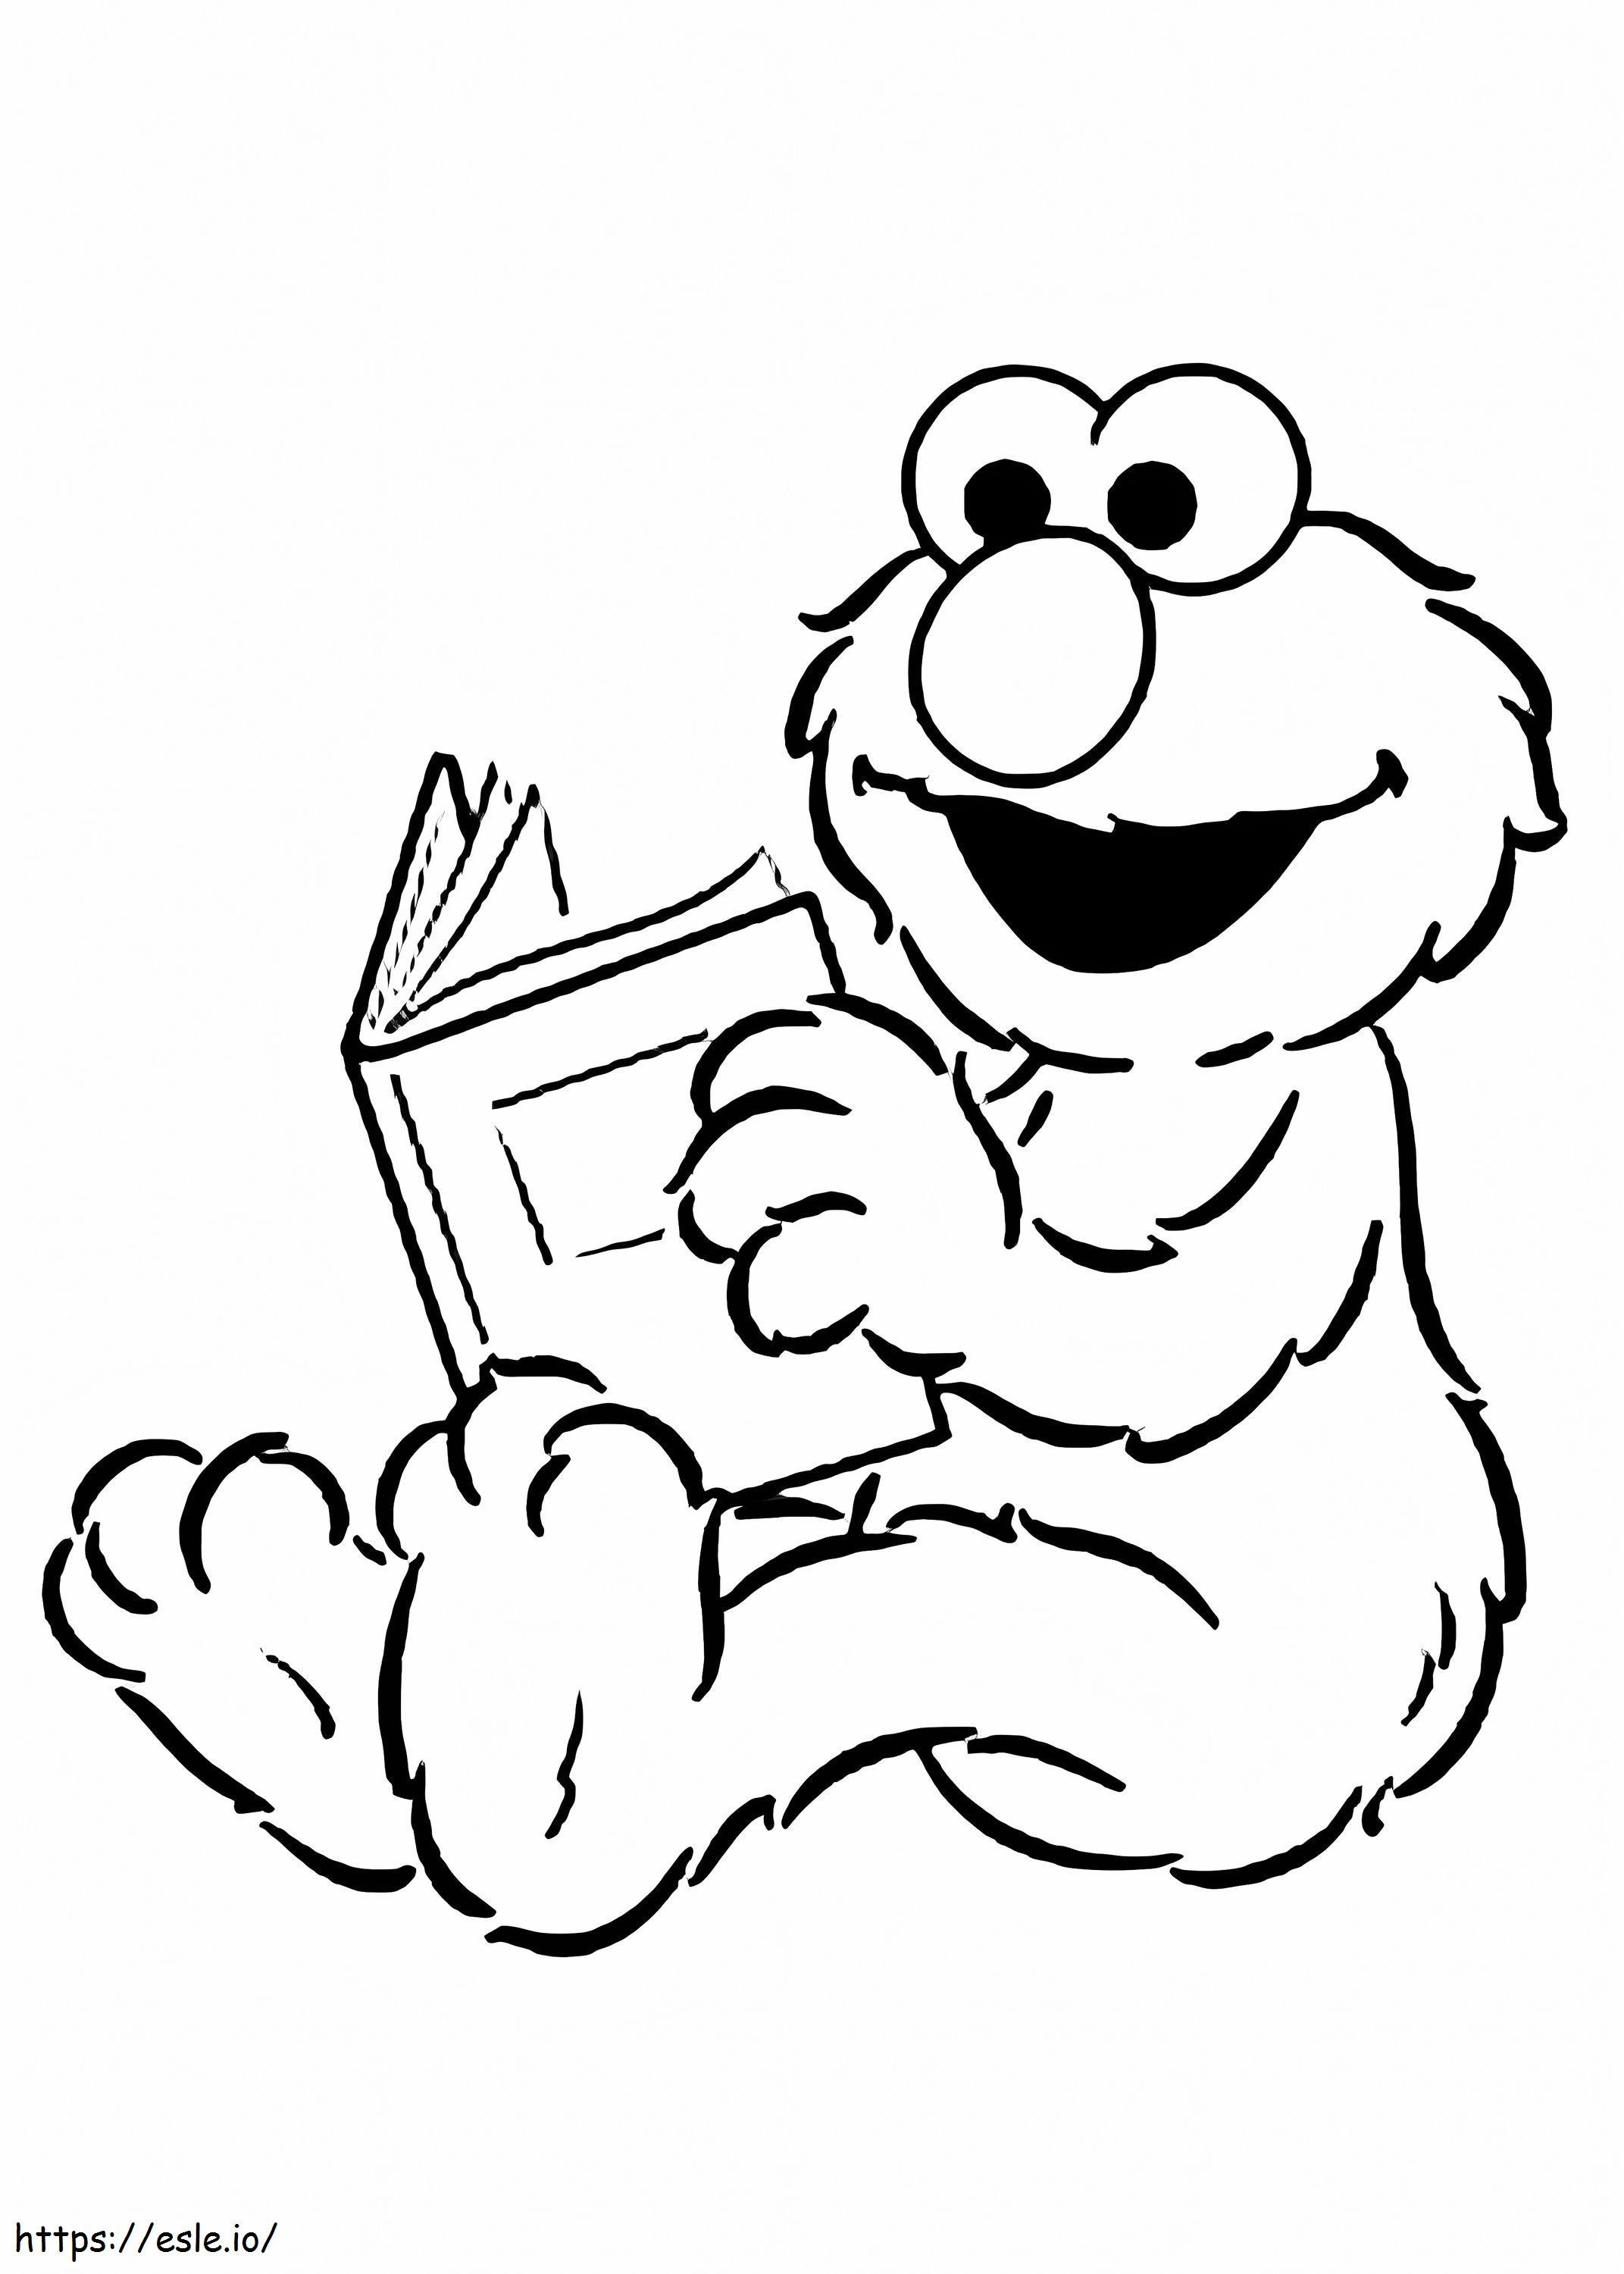 Elmo Reading Book coloring page